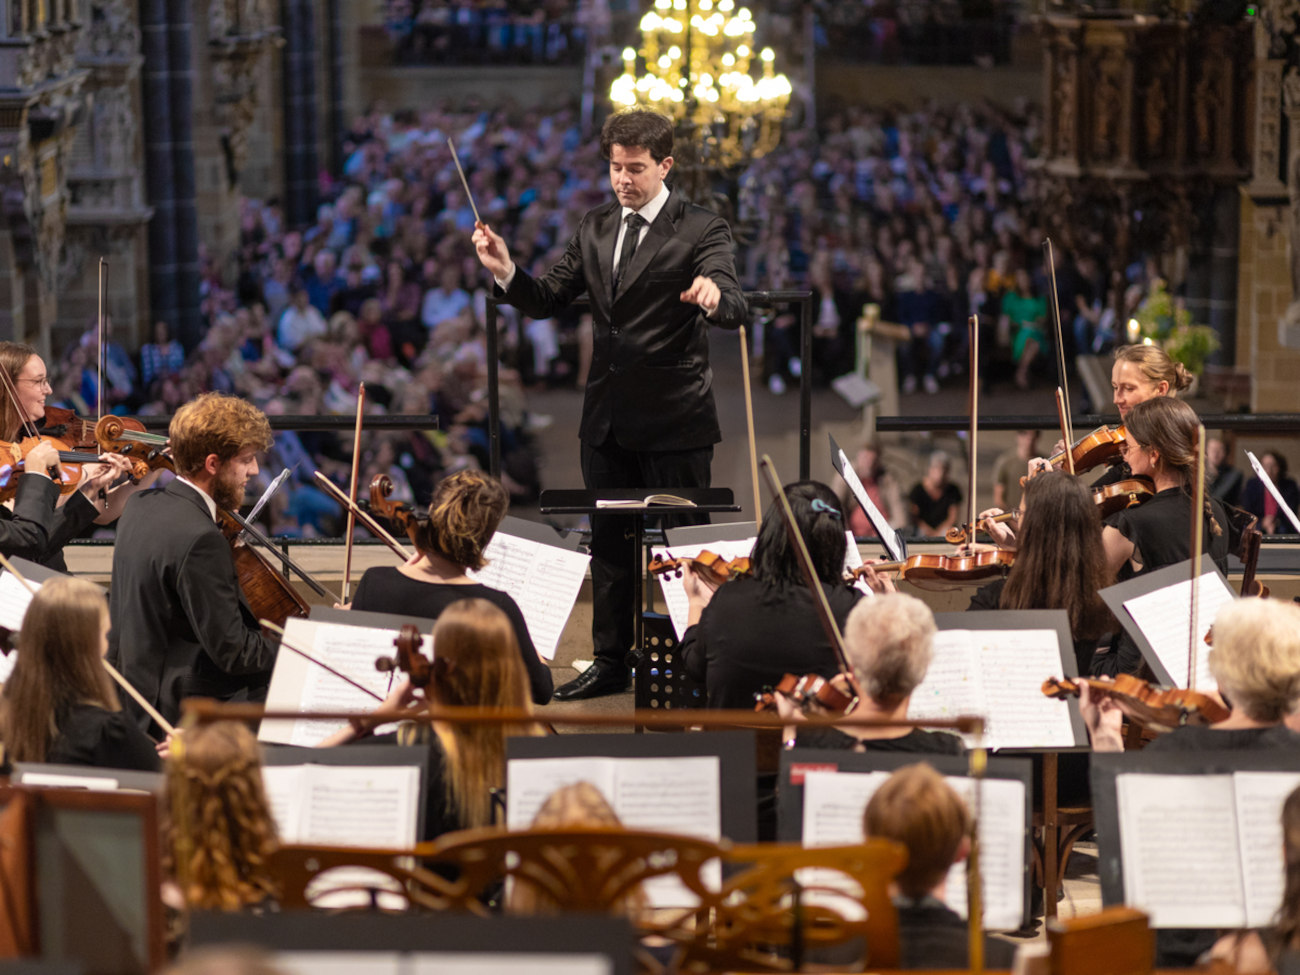 A male conductor stands in front of an orchestra.